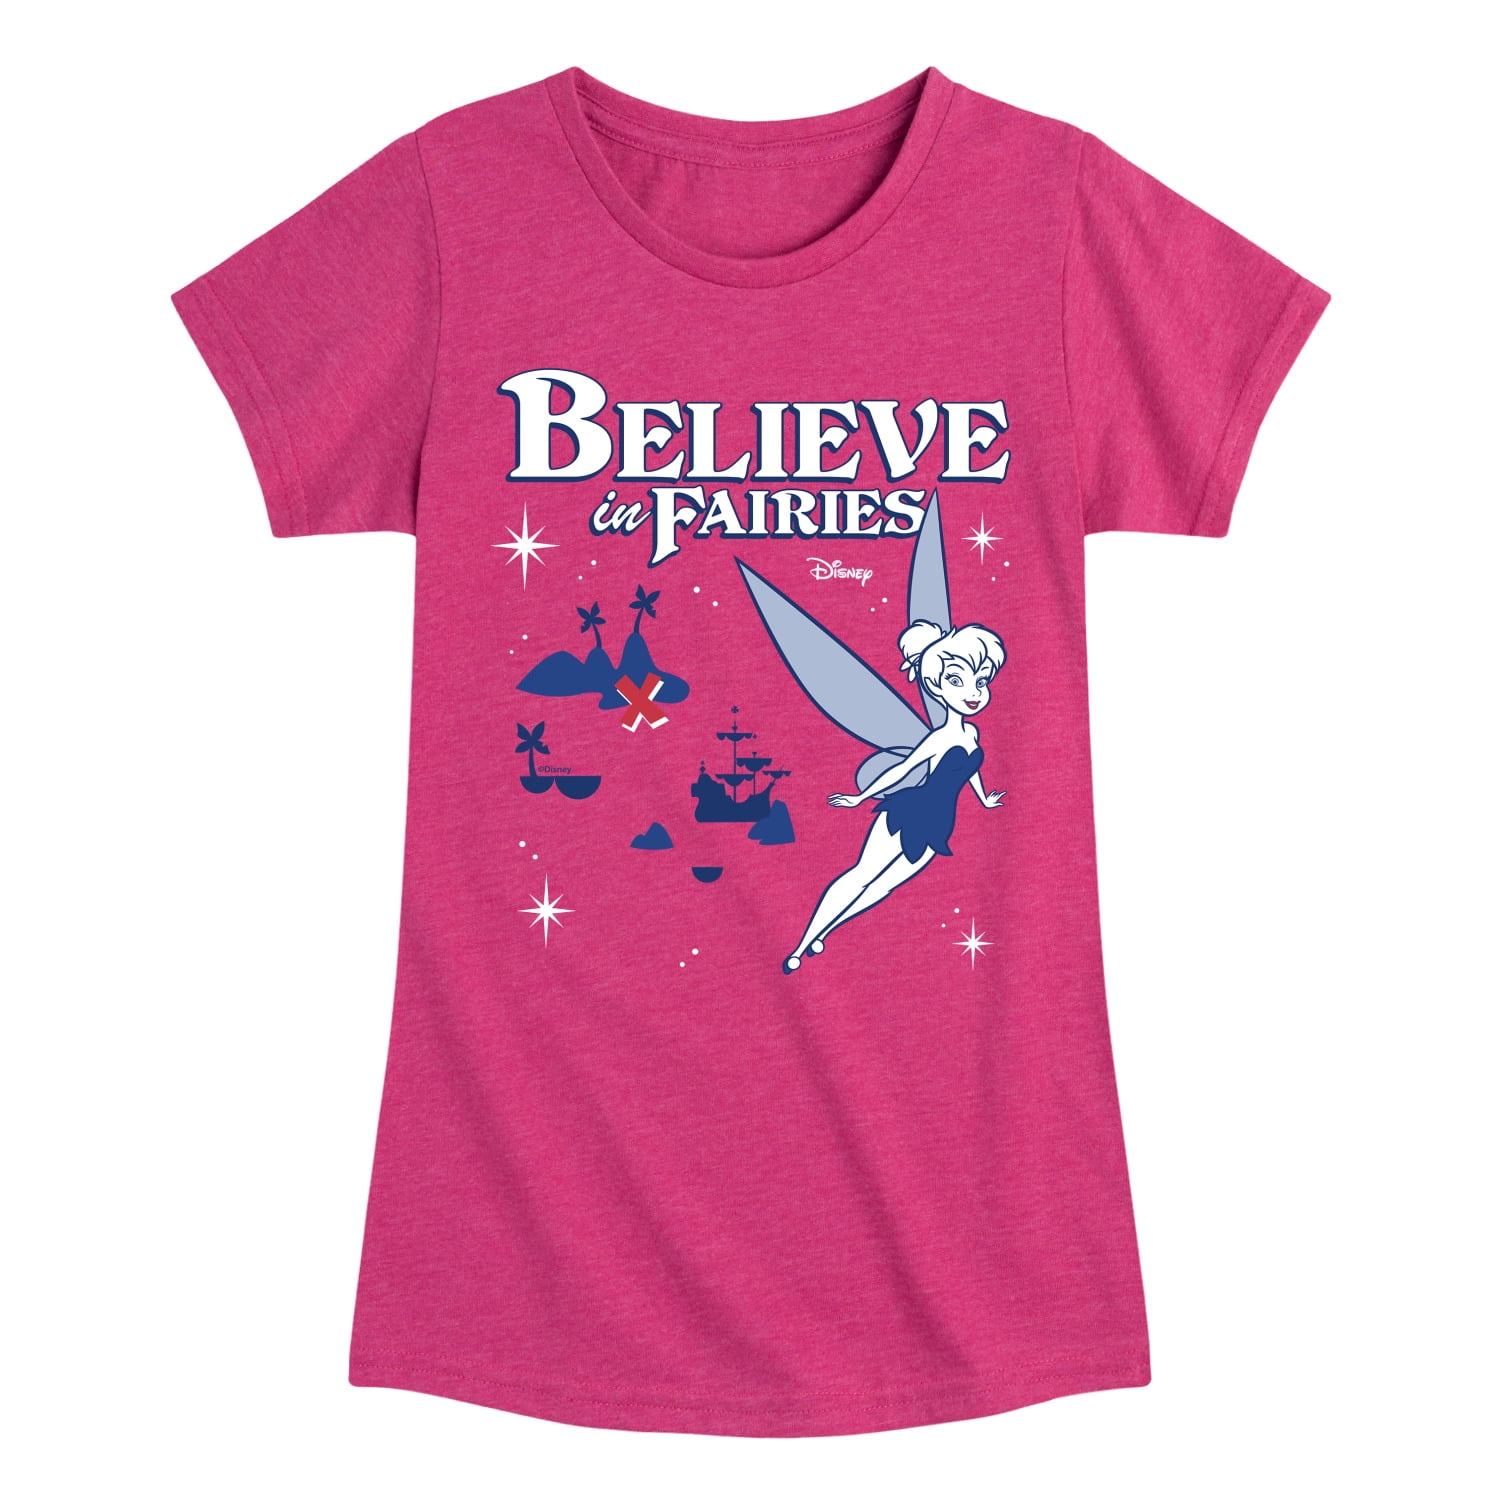 Disney - Peter Pan - Tinkerbell - Believe in Fairies - Toddler And Youth  Girls Short Sleeve Graphic T-Shirt